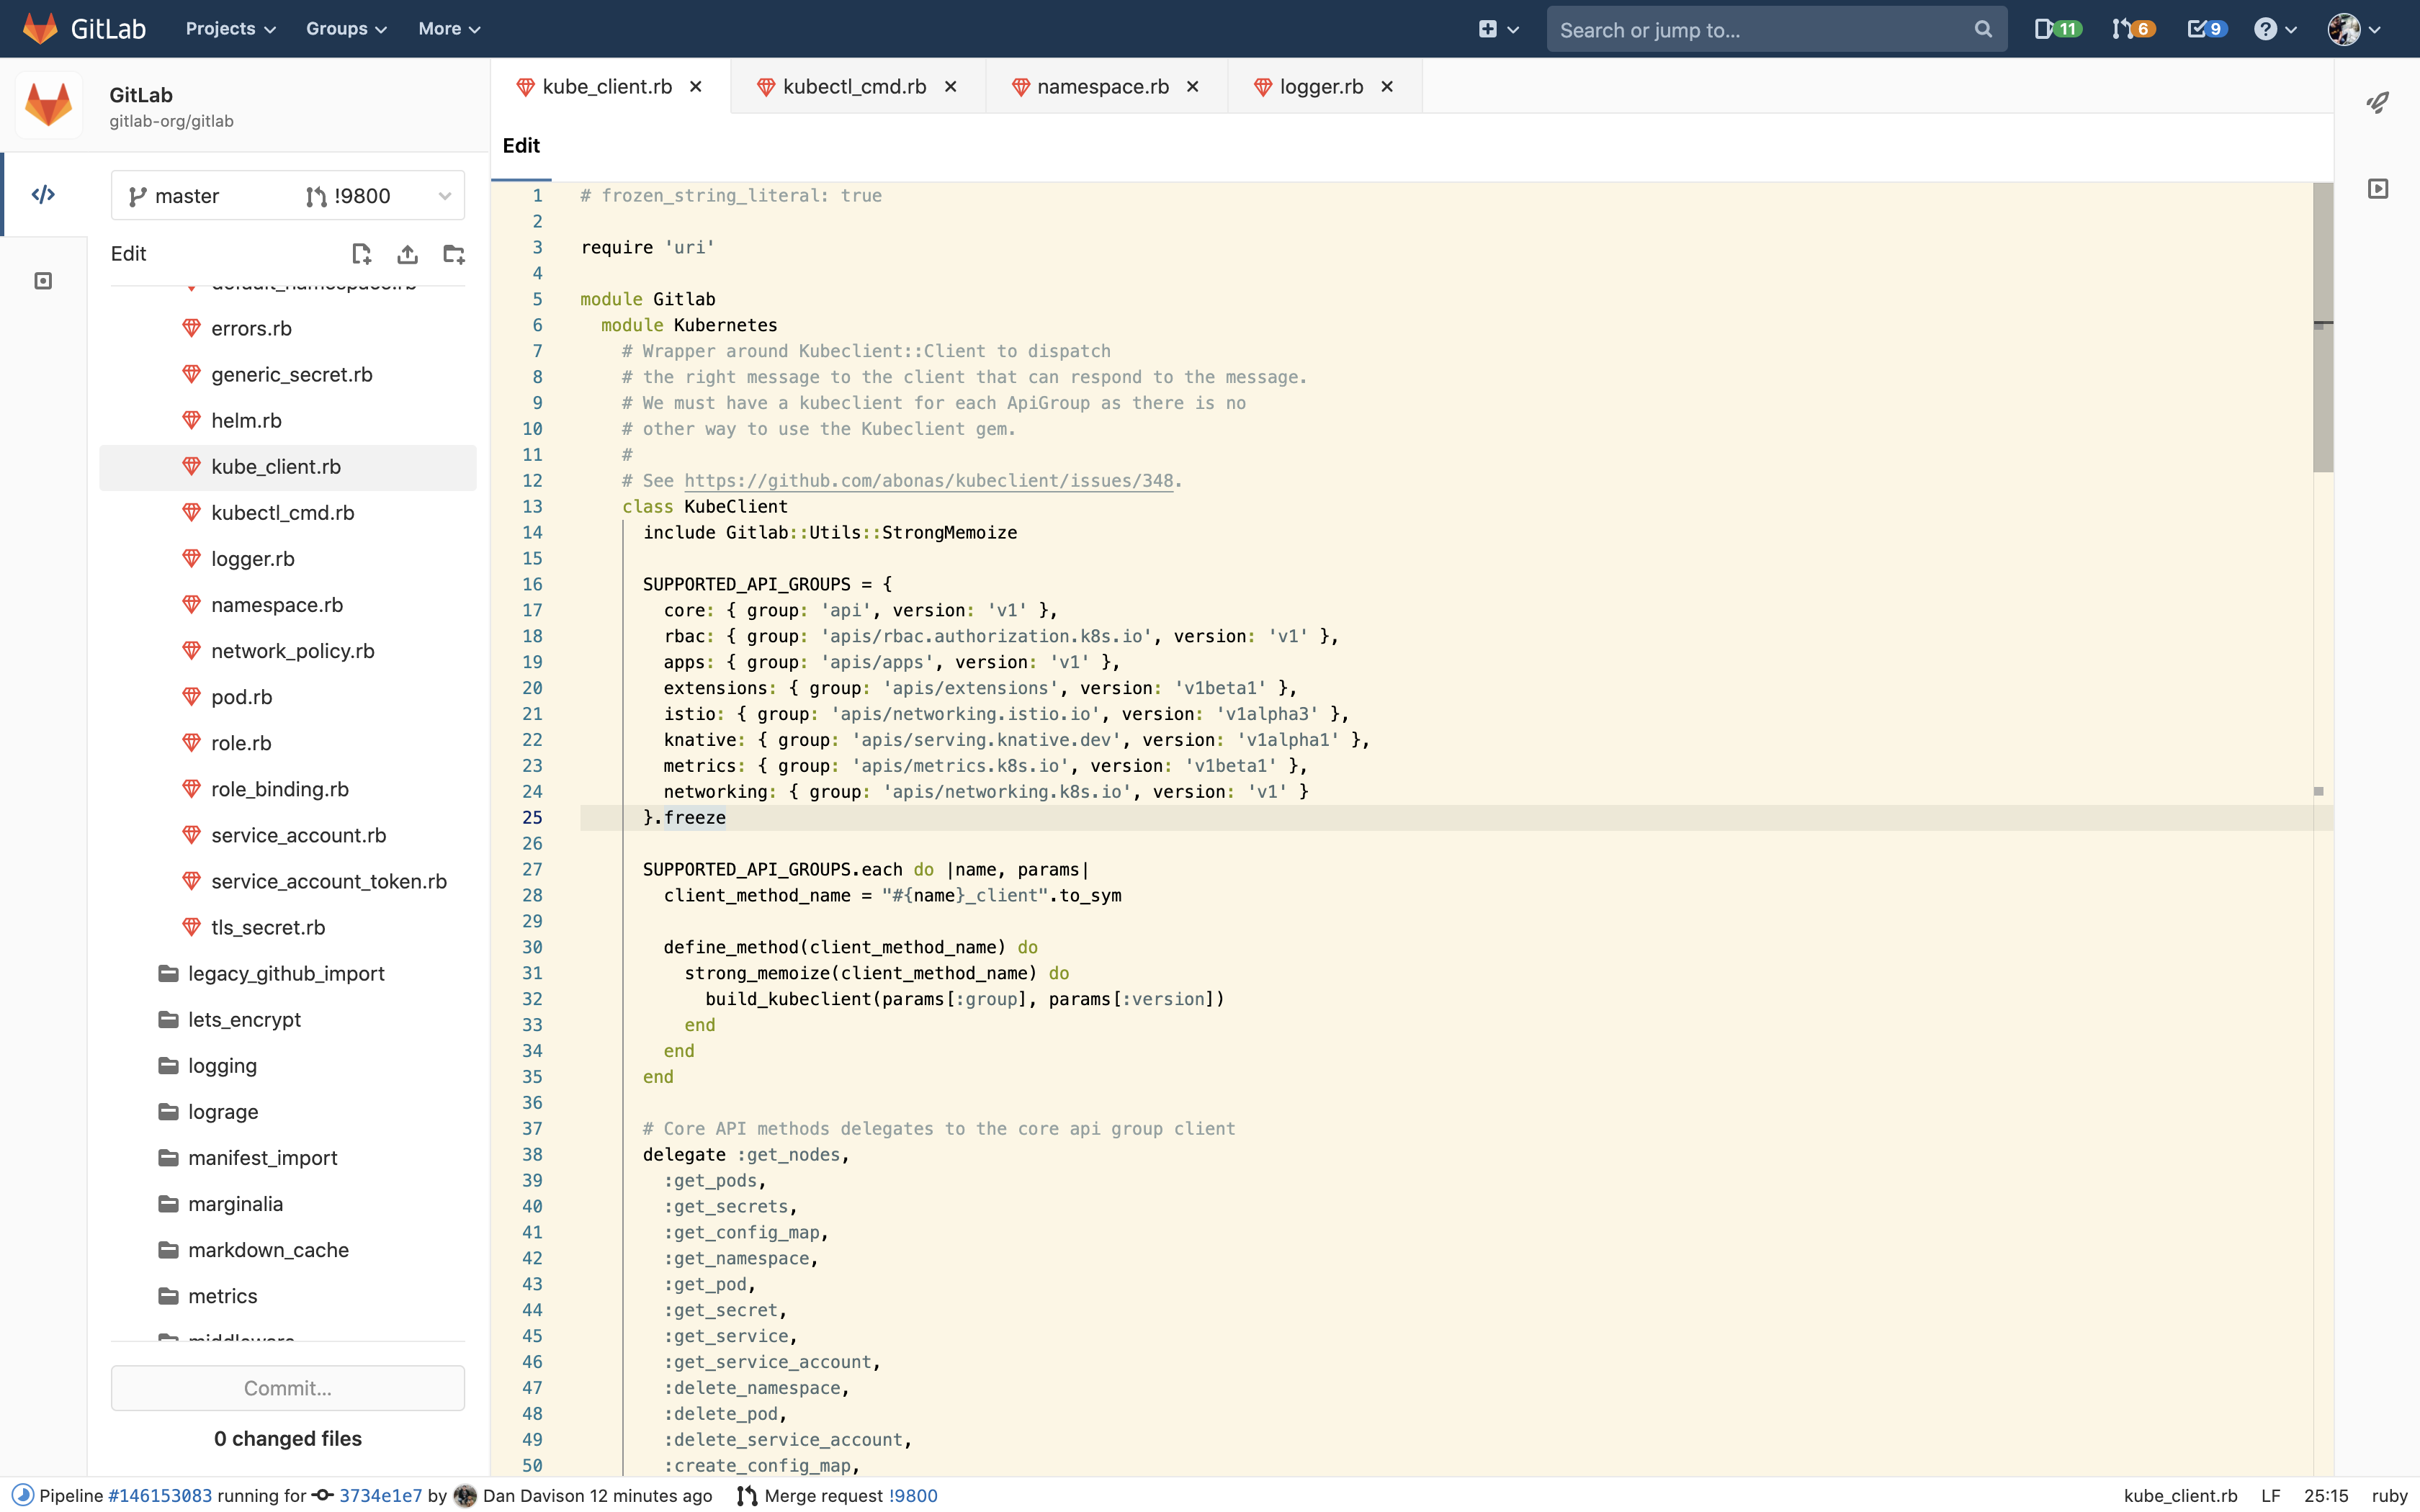 doc/user/project/web_ide/img/solarized_light_theme_v13.0.png